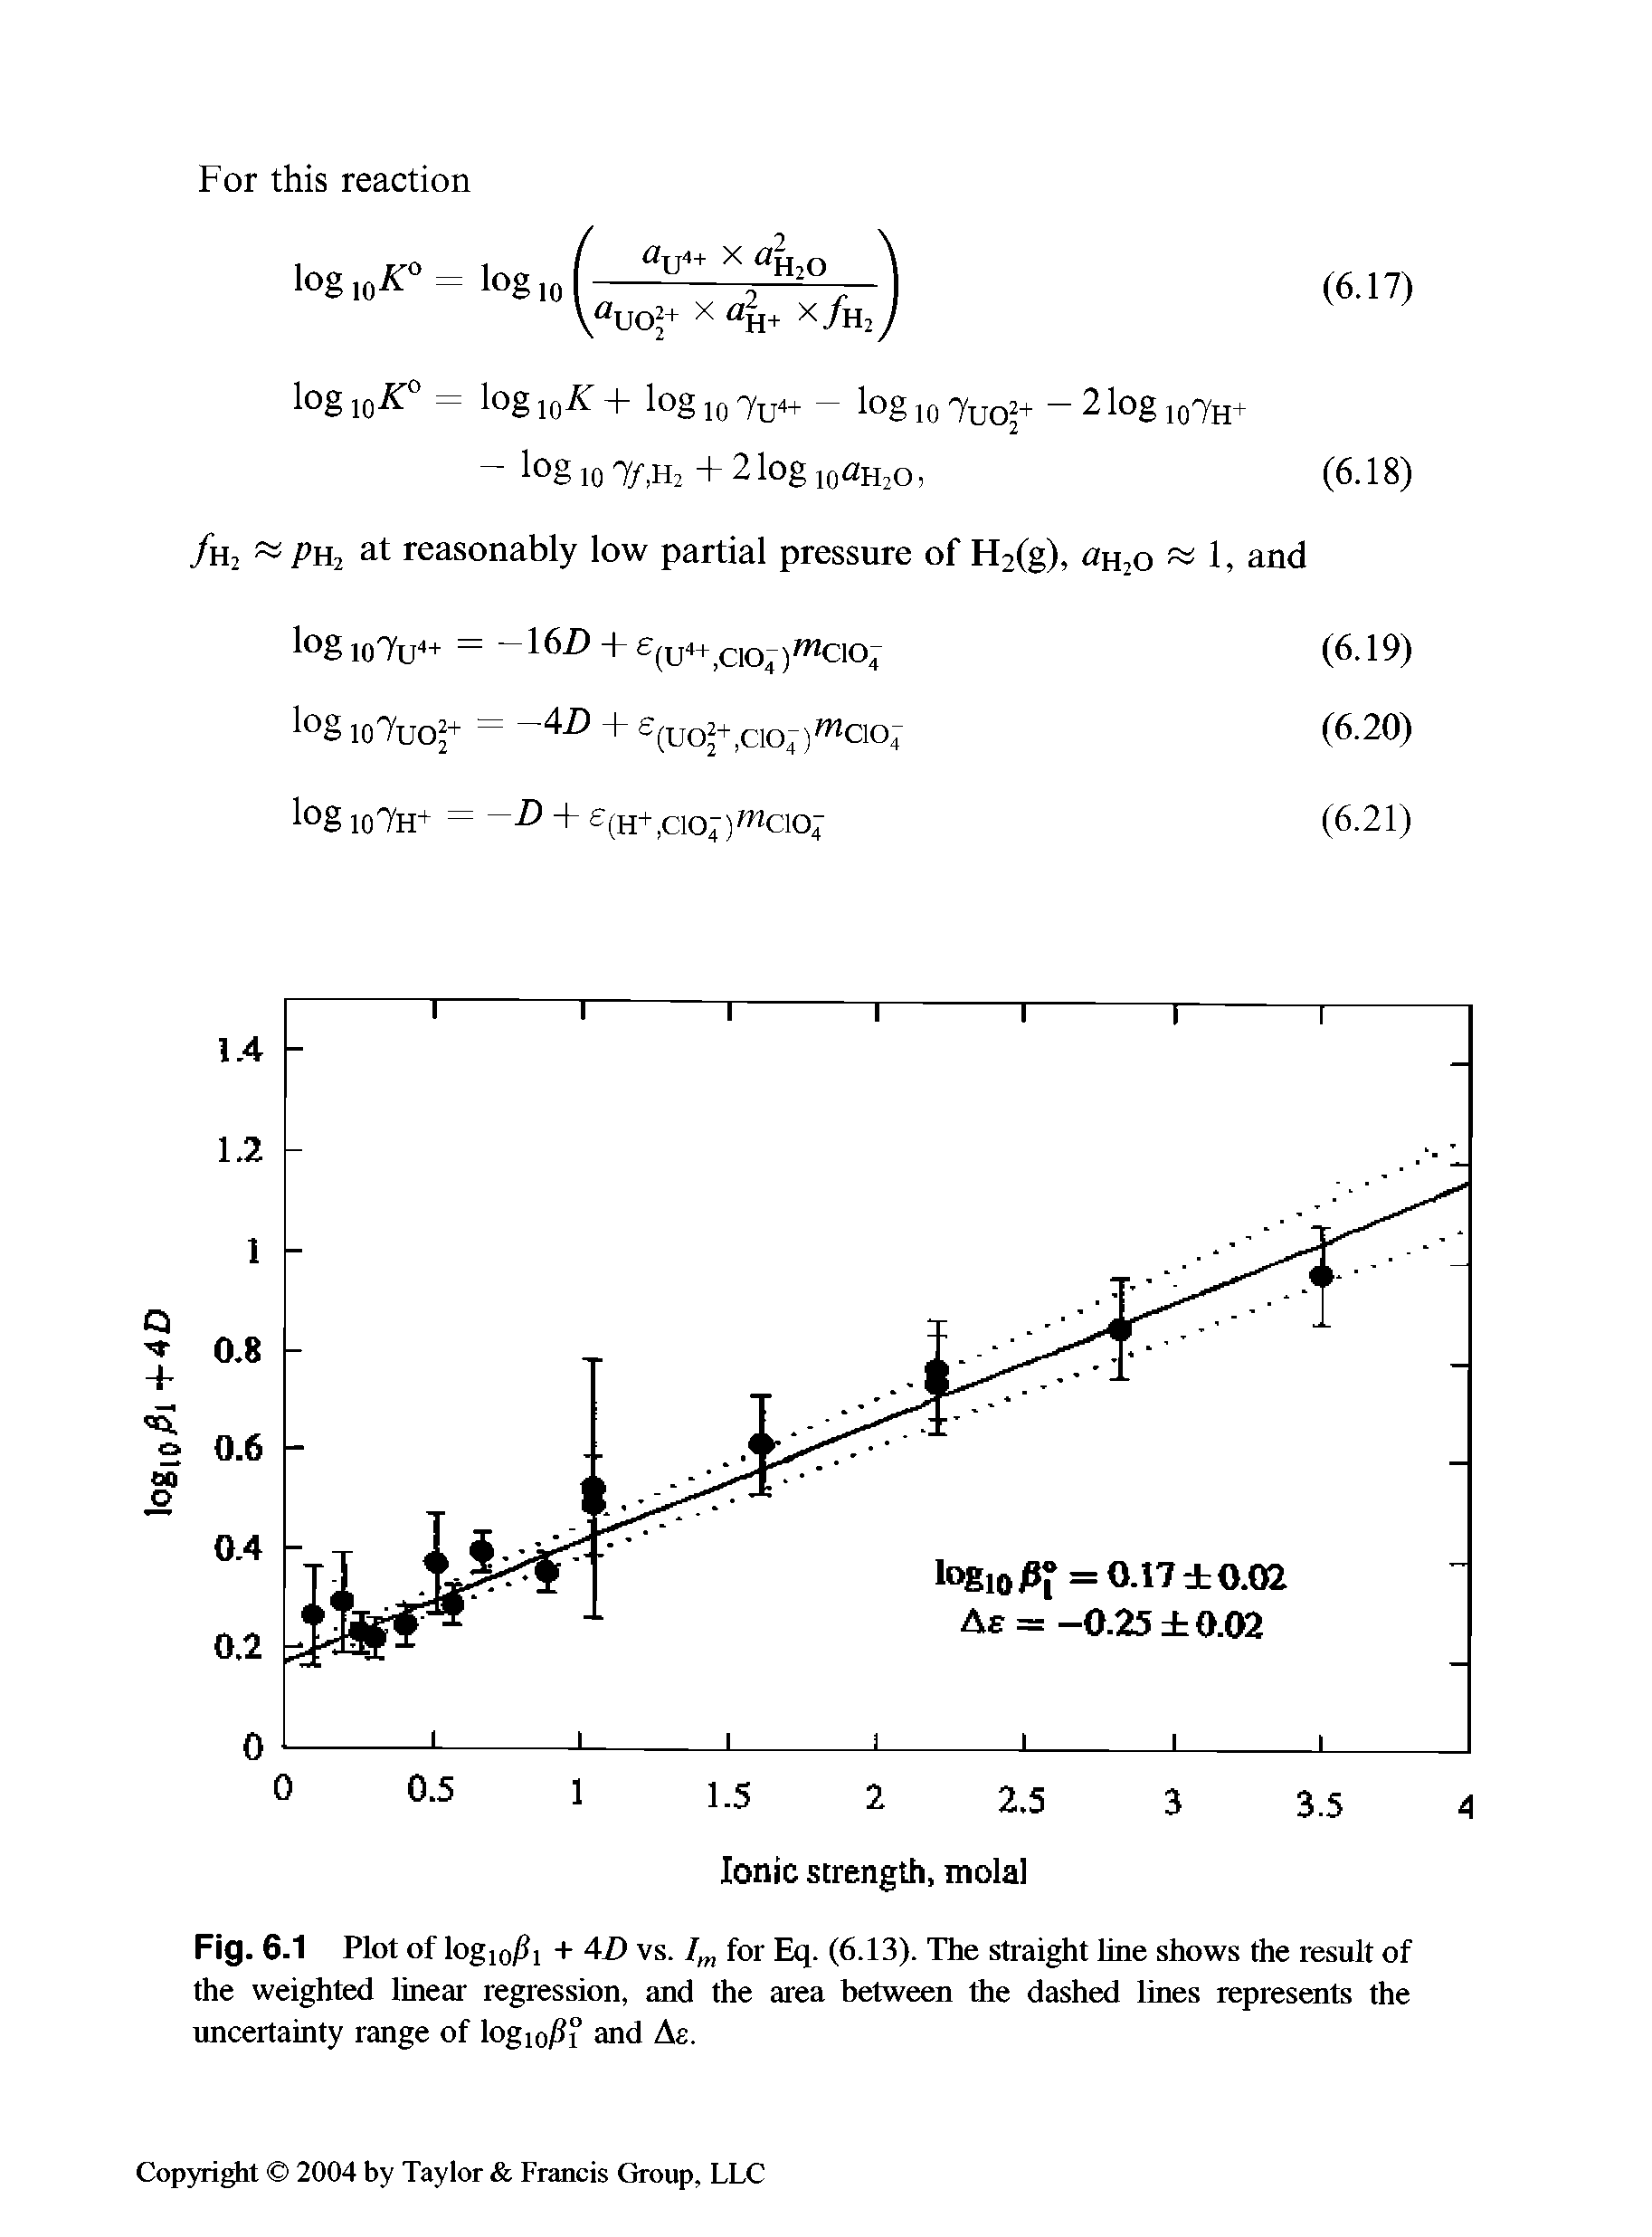 Fig. 6.1 Plot of logio/li + 4Z) vs. 7 for Eq. (6.13). The straight hne shows the result of the weighted linear regression, and the area between the dashed lines represents the uncertainty range of logioi i and As.